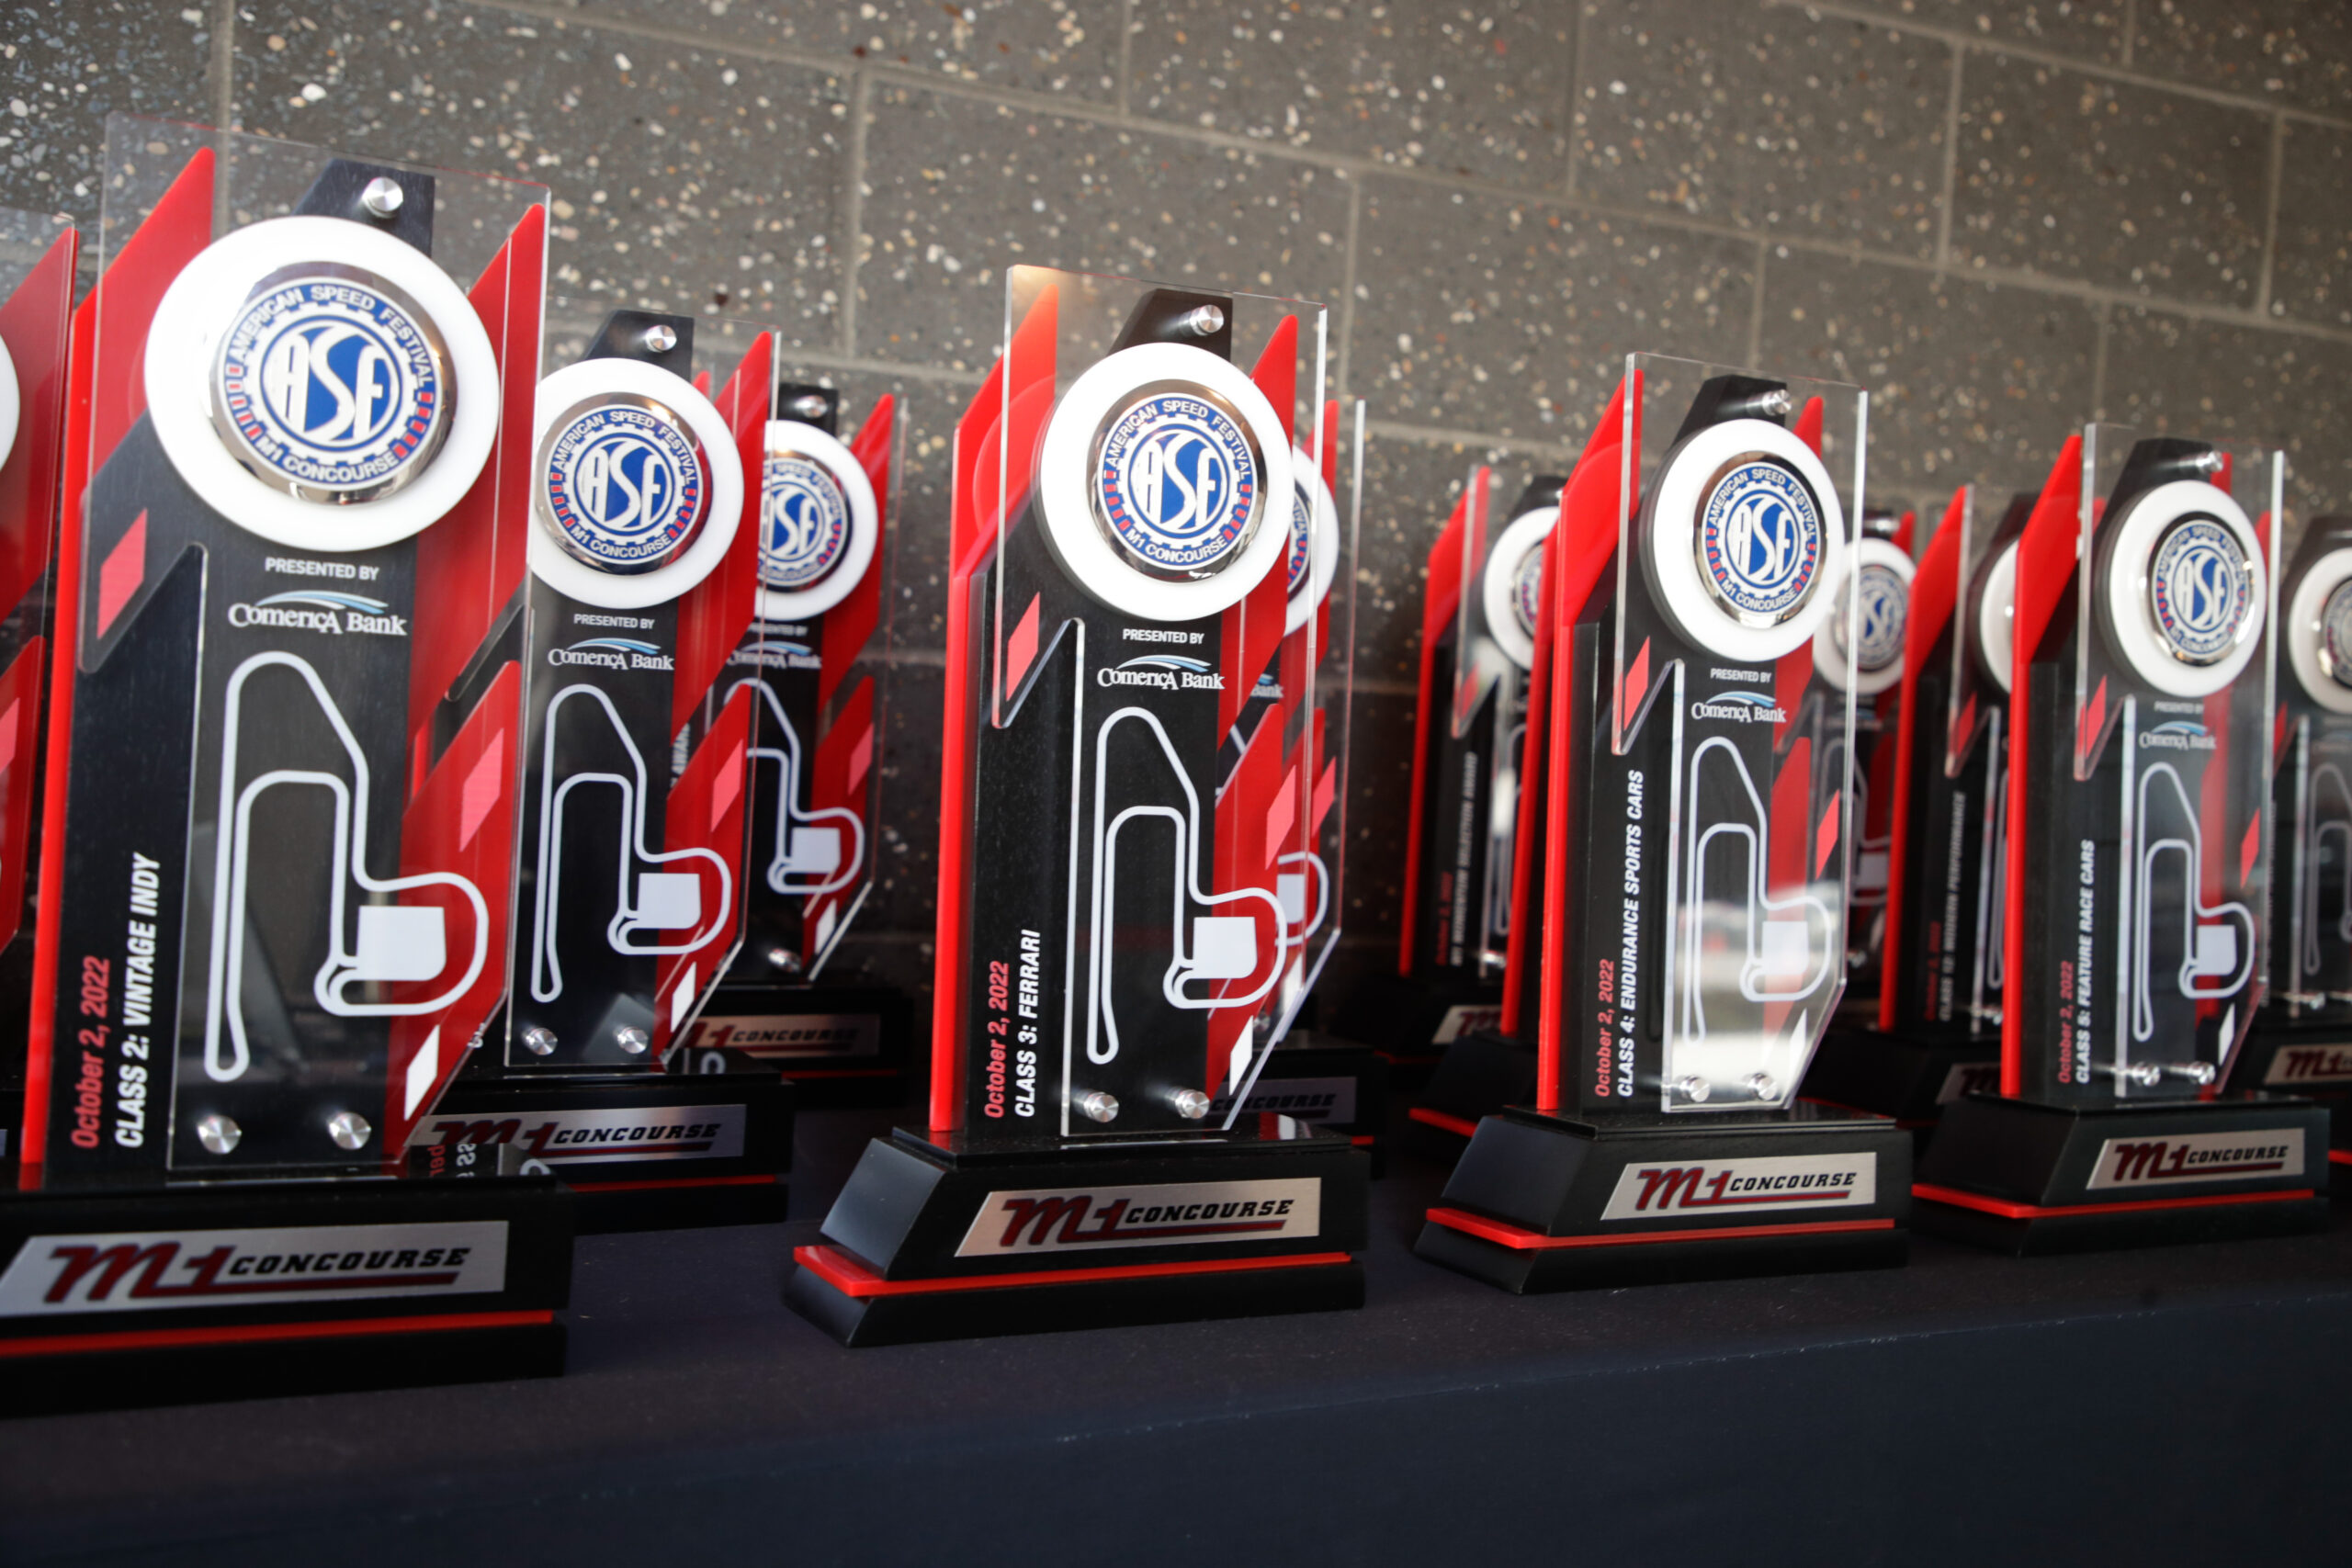 ASF Car Class Winner awards lined up on table